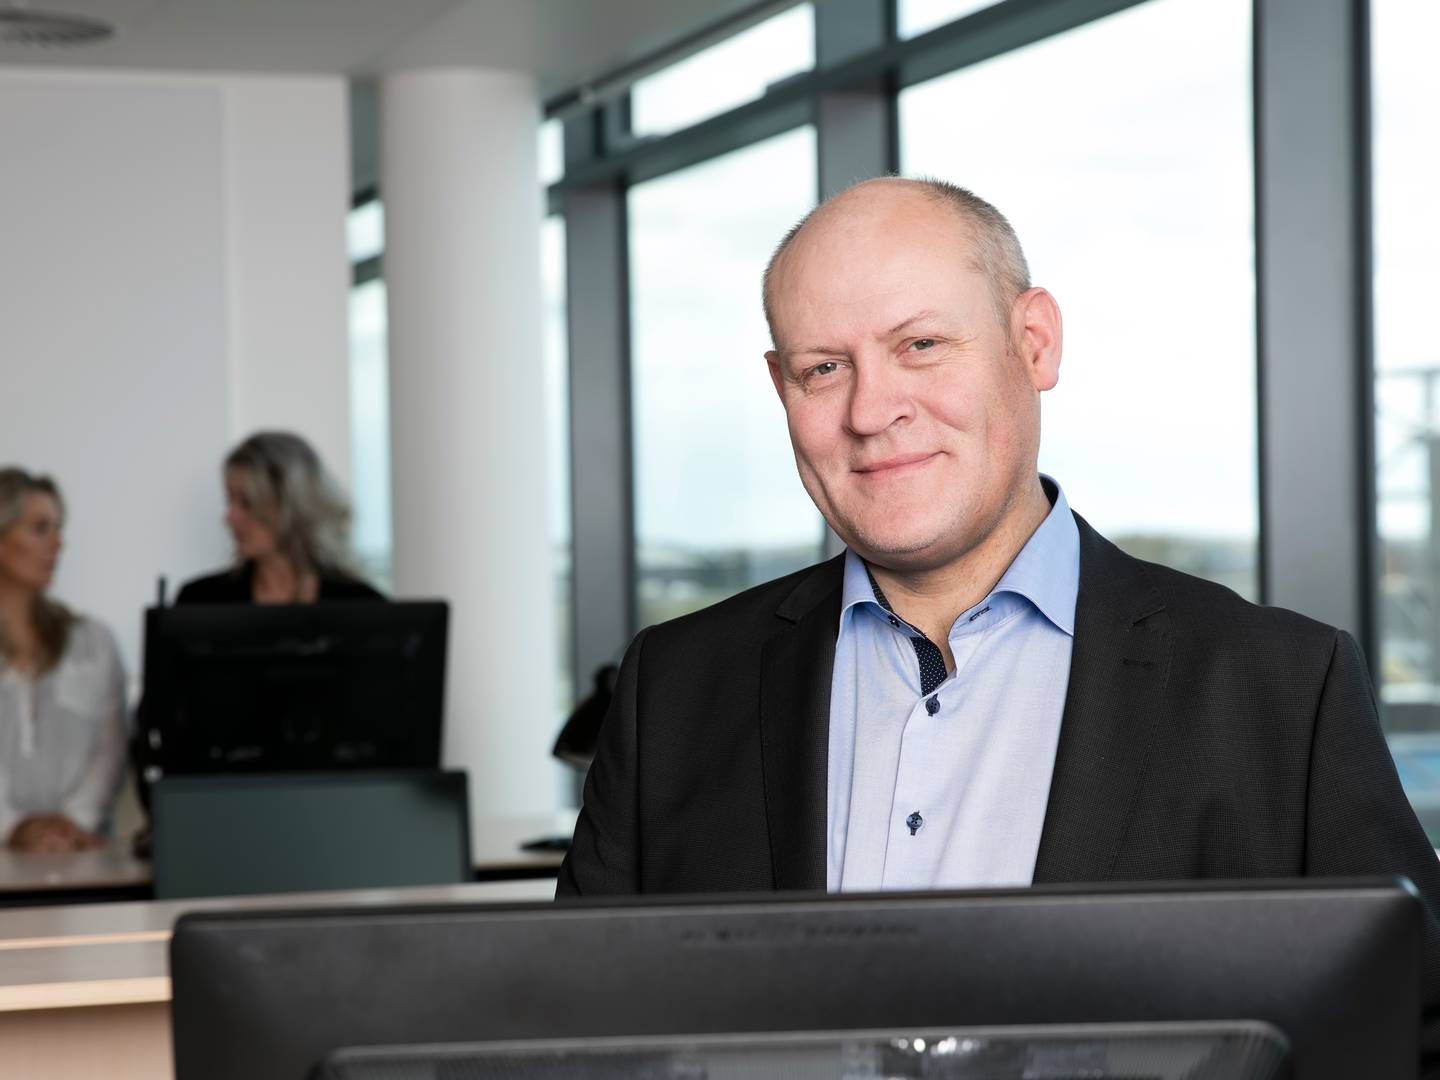 Lars Petersen, CEO of Fujifilm Diosynth Biotechnologies (photo), and Søren Bregenholt, CEO of Sweden's Alligator Biosciences, have been nominated for the Danish Life Science Executive of the Year award. | Photo: Fujifilm Diosynth Biotechnologies / Pr